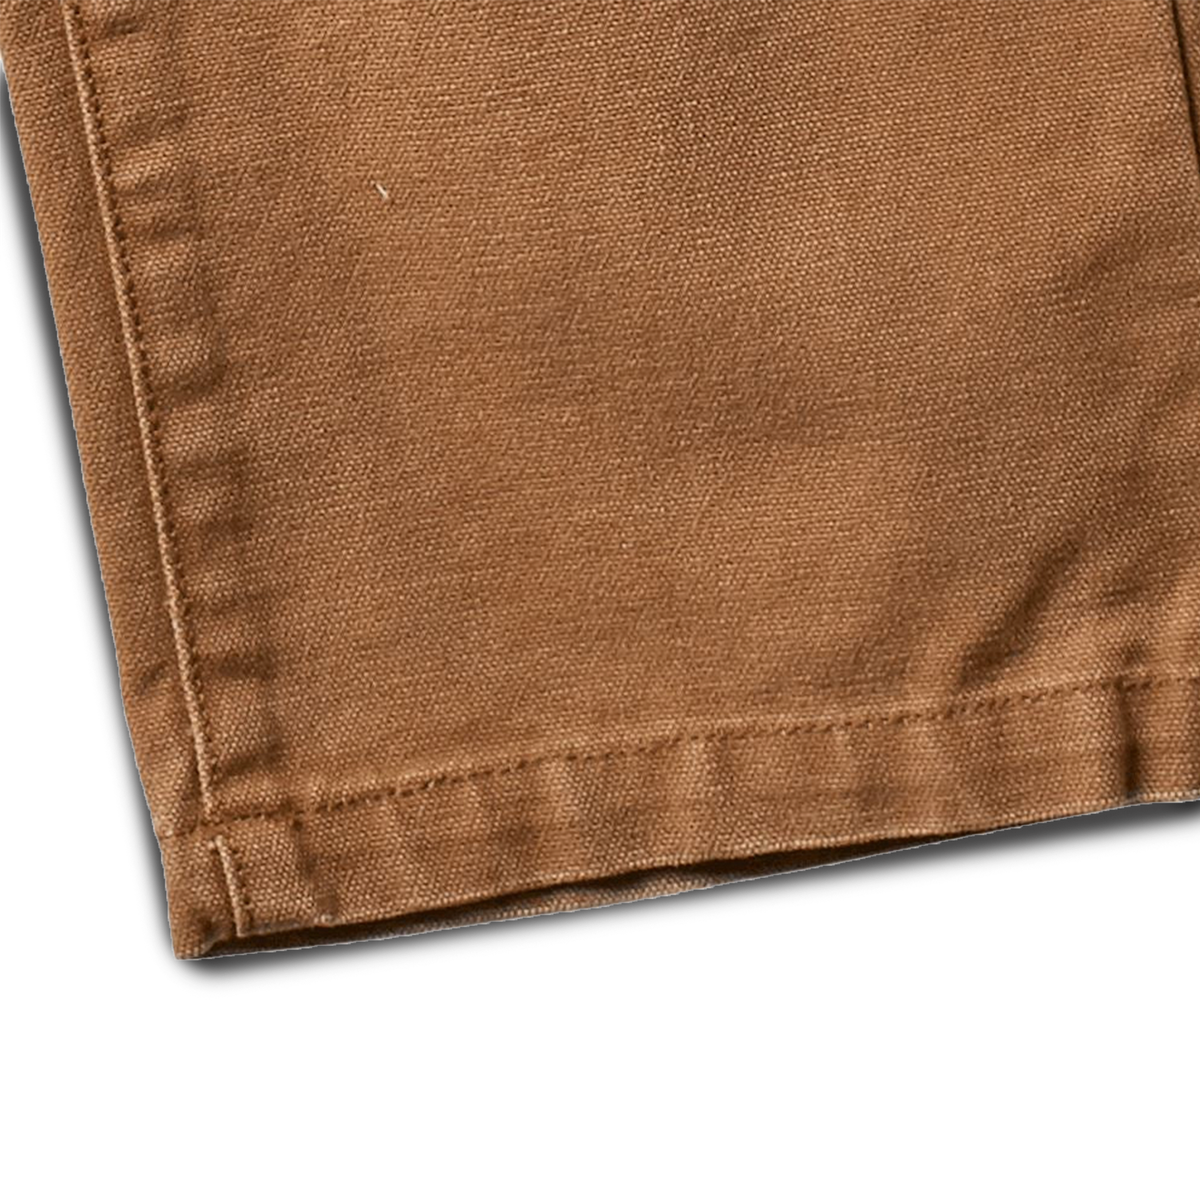 Foundation Canvas Pant - 12 oz. - Camel  ONLY  33, 31